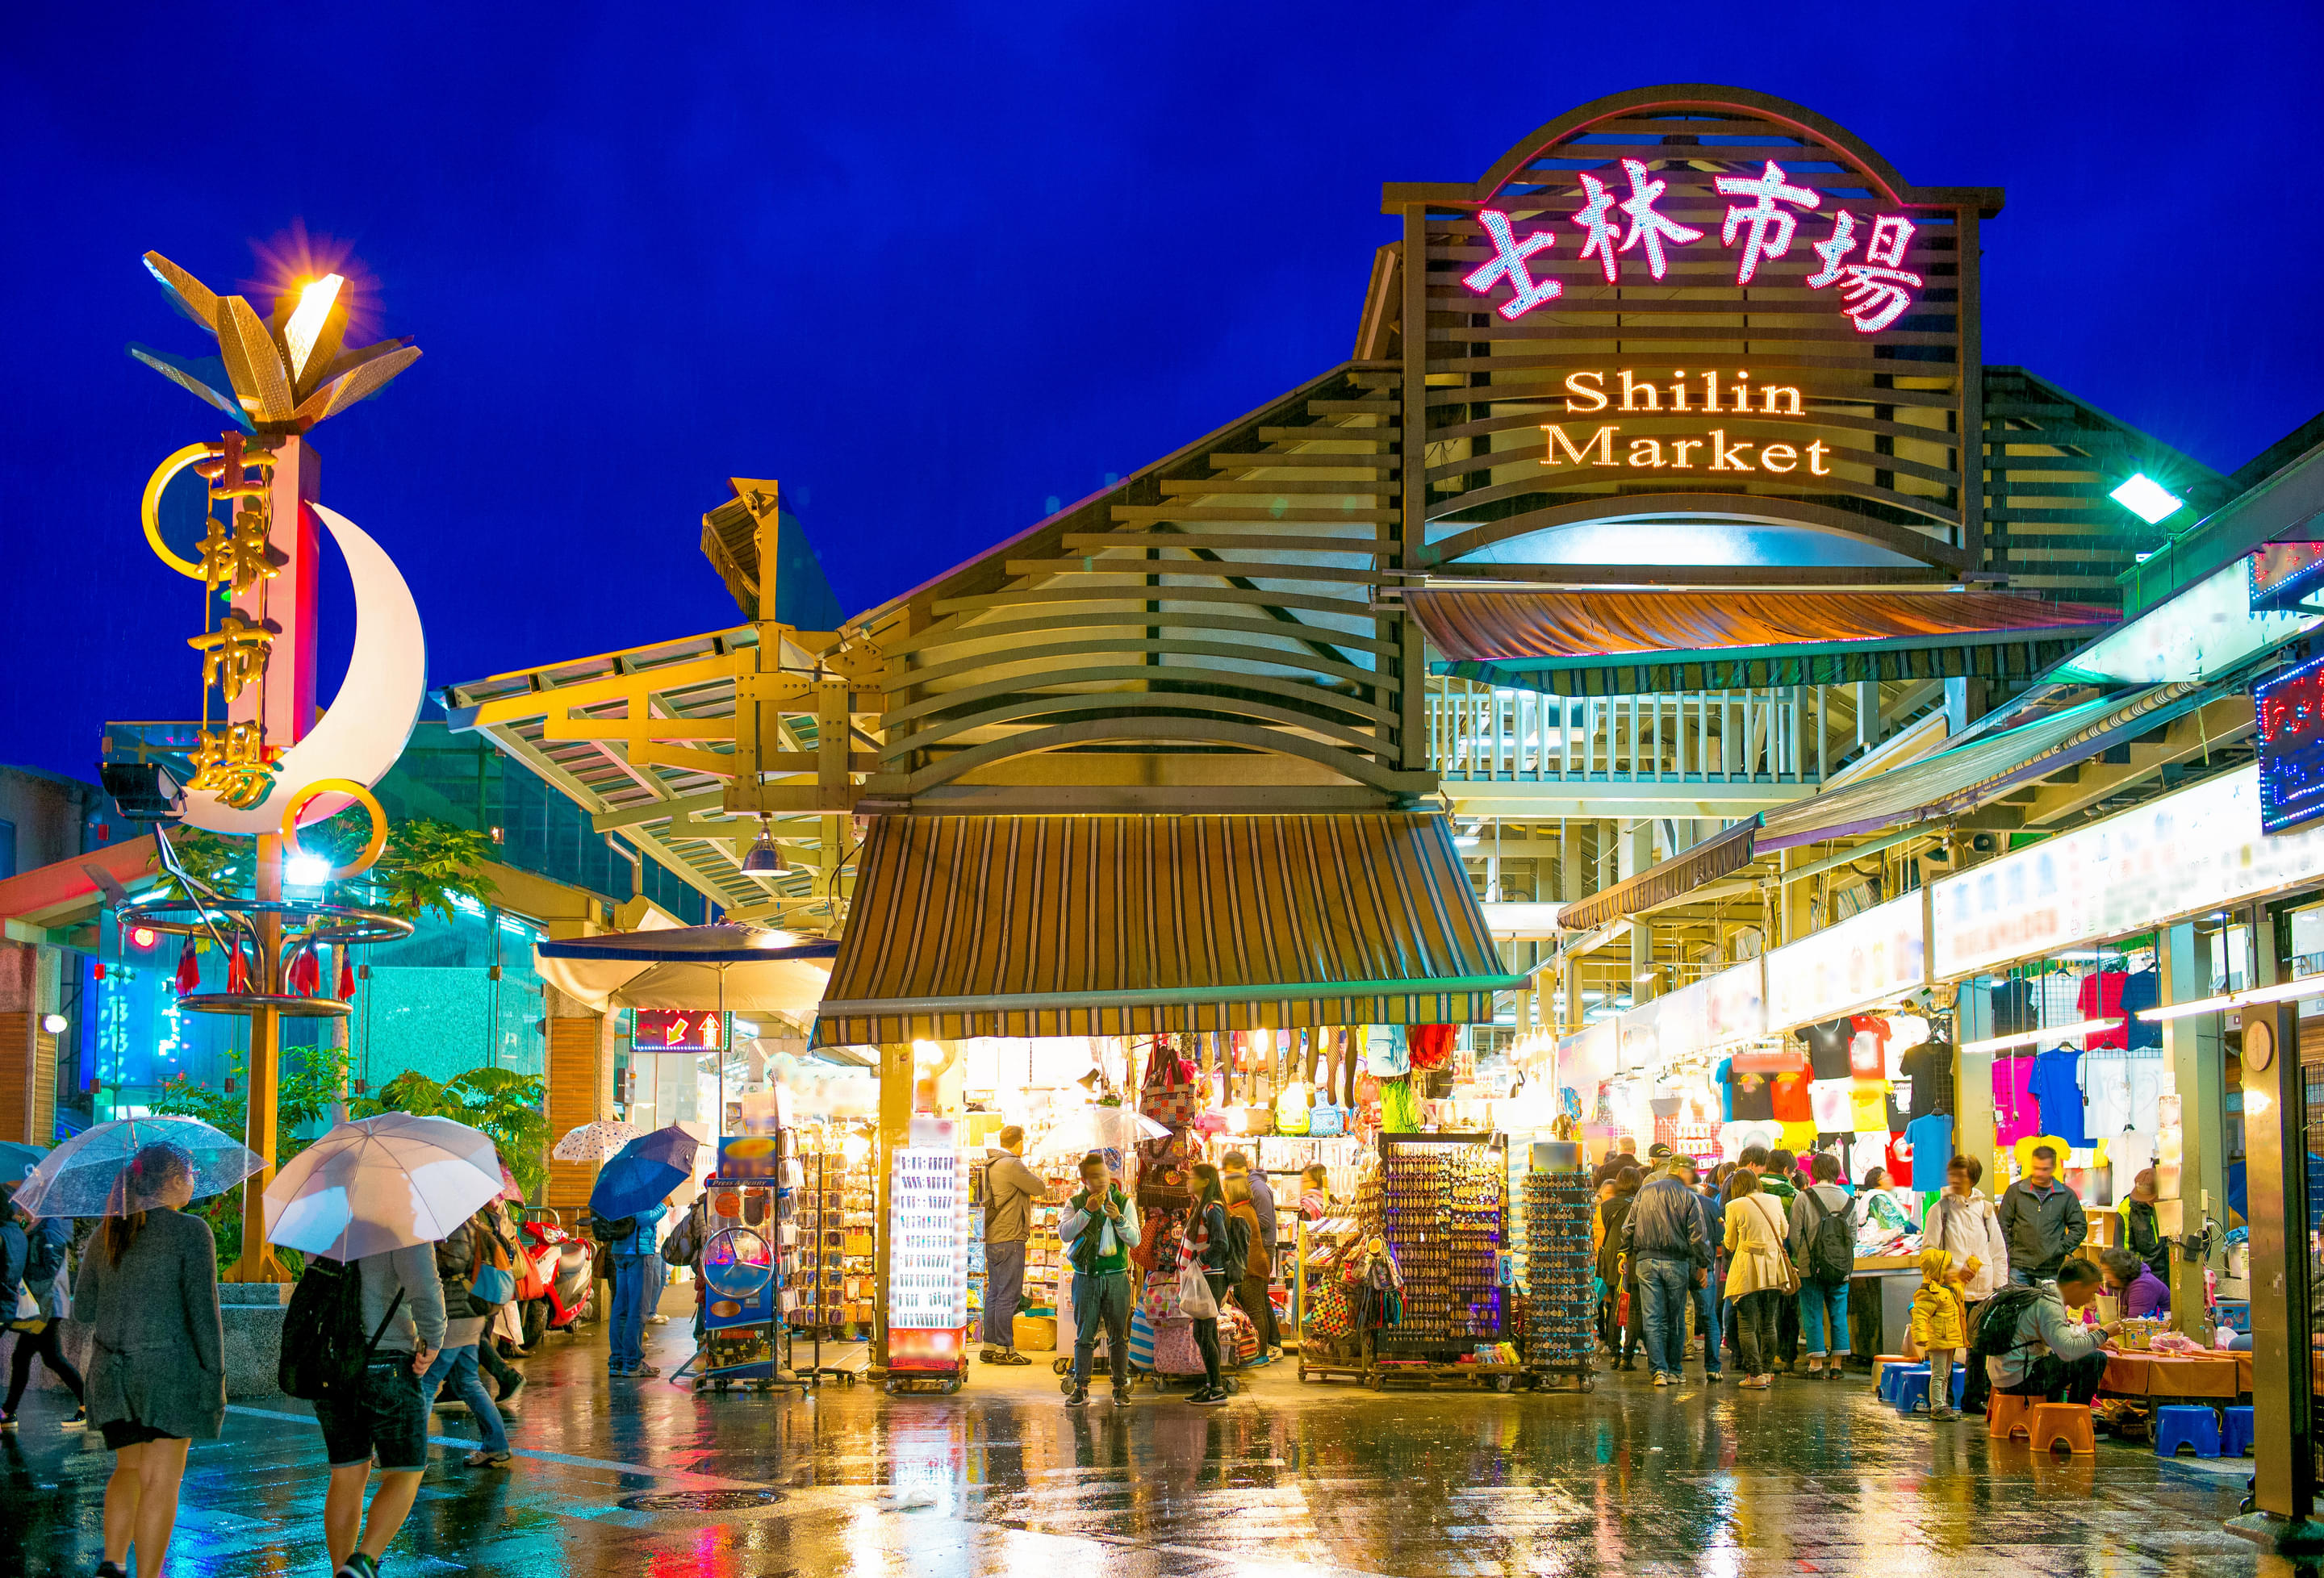 Shilin Night Market Overview